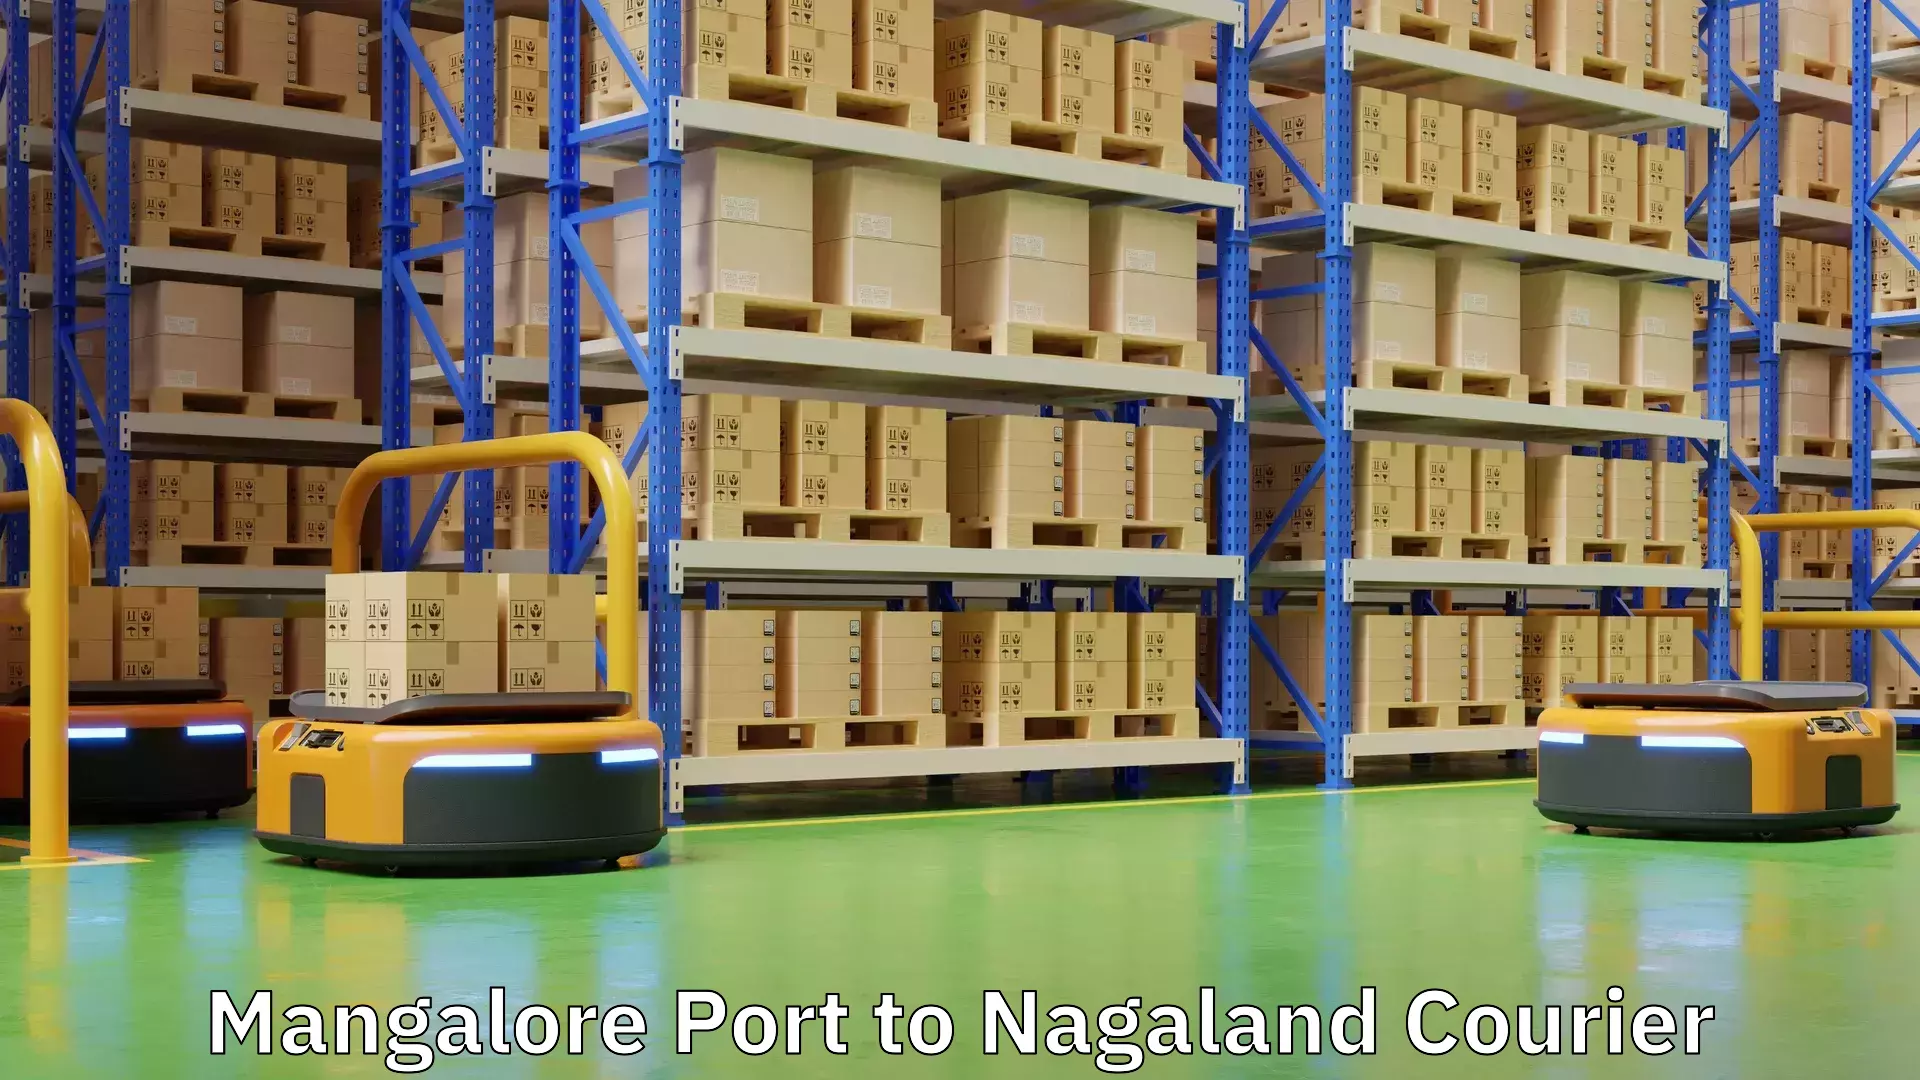 Custom courier packages Mangalore Port to Nagaland